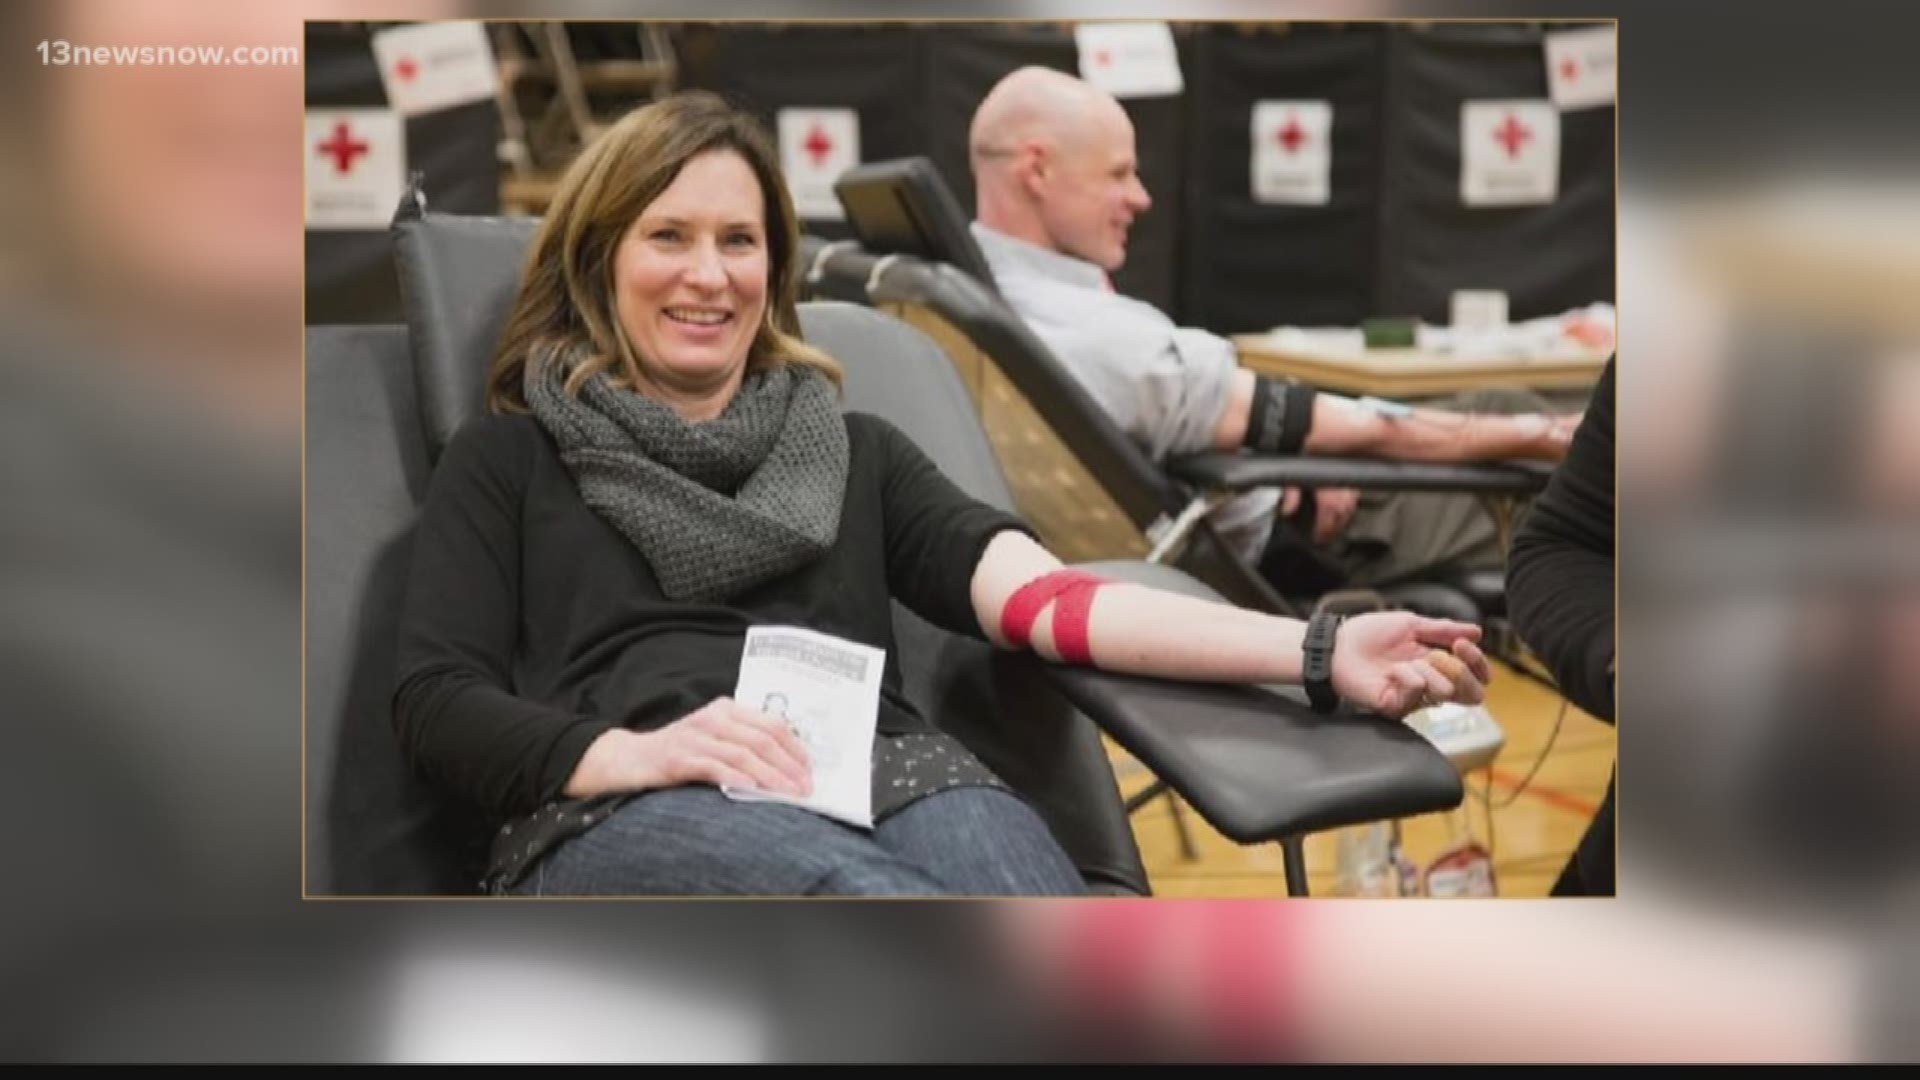 Red Cross in need of blood over Thanksgiving holiday